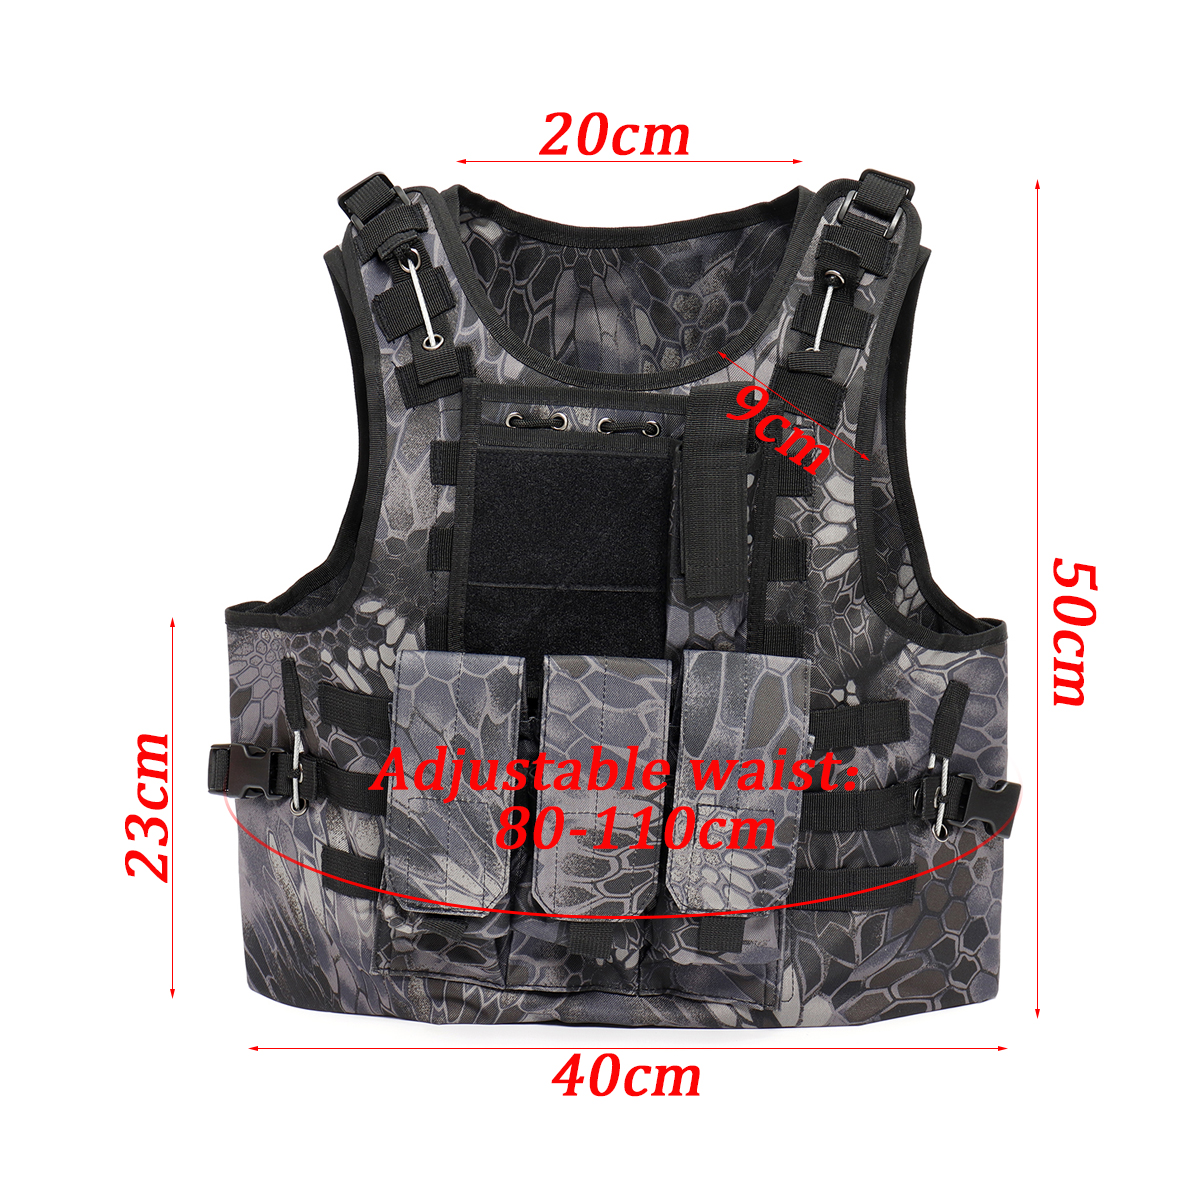 Outdoor-Tactical-Military-Vest-Sports-Hunting-Hiking-Climbing-Plate-Carrier-Paintball-Combat-Vest-1431934-4